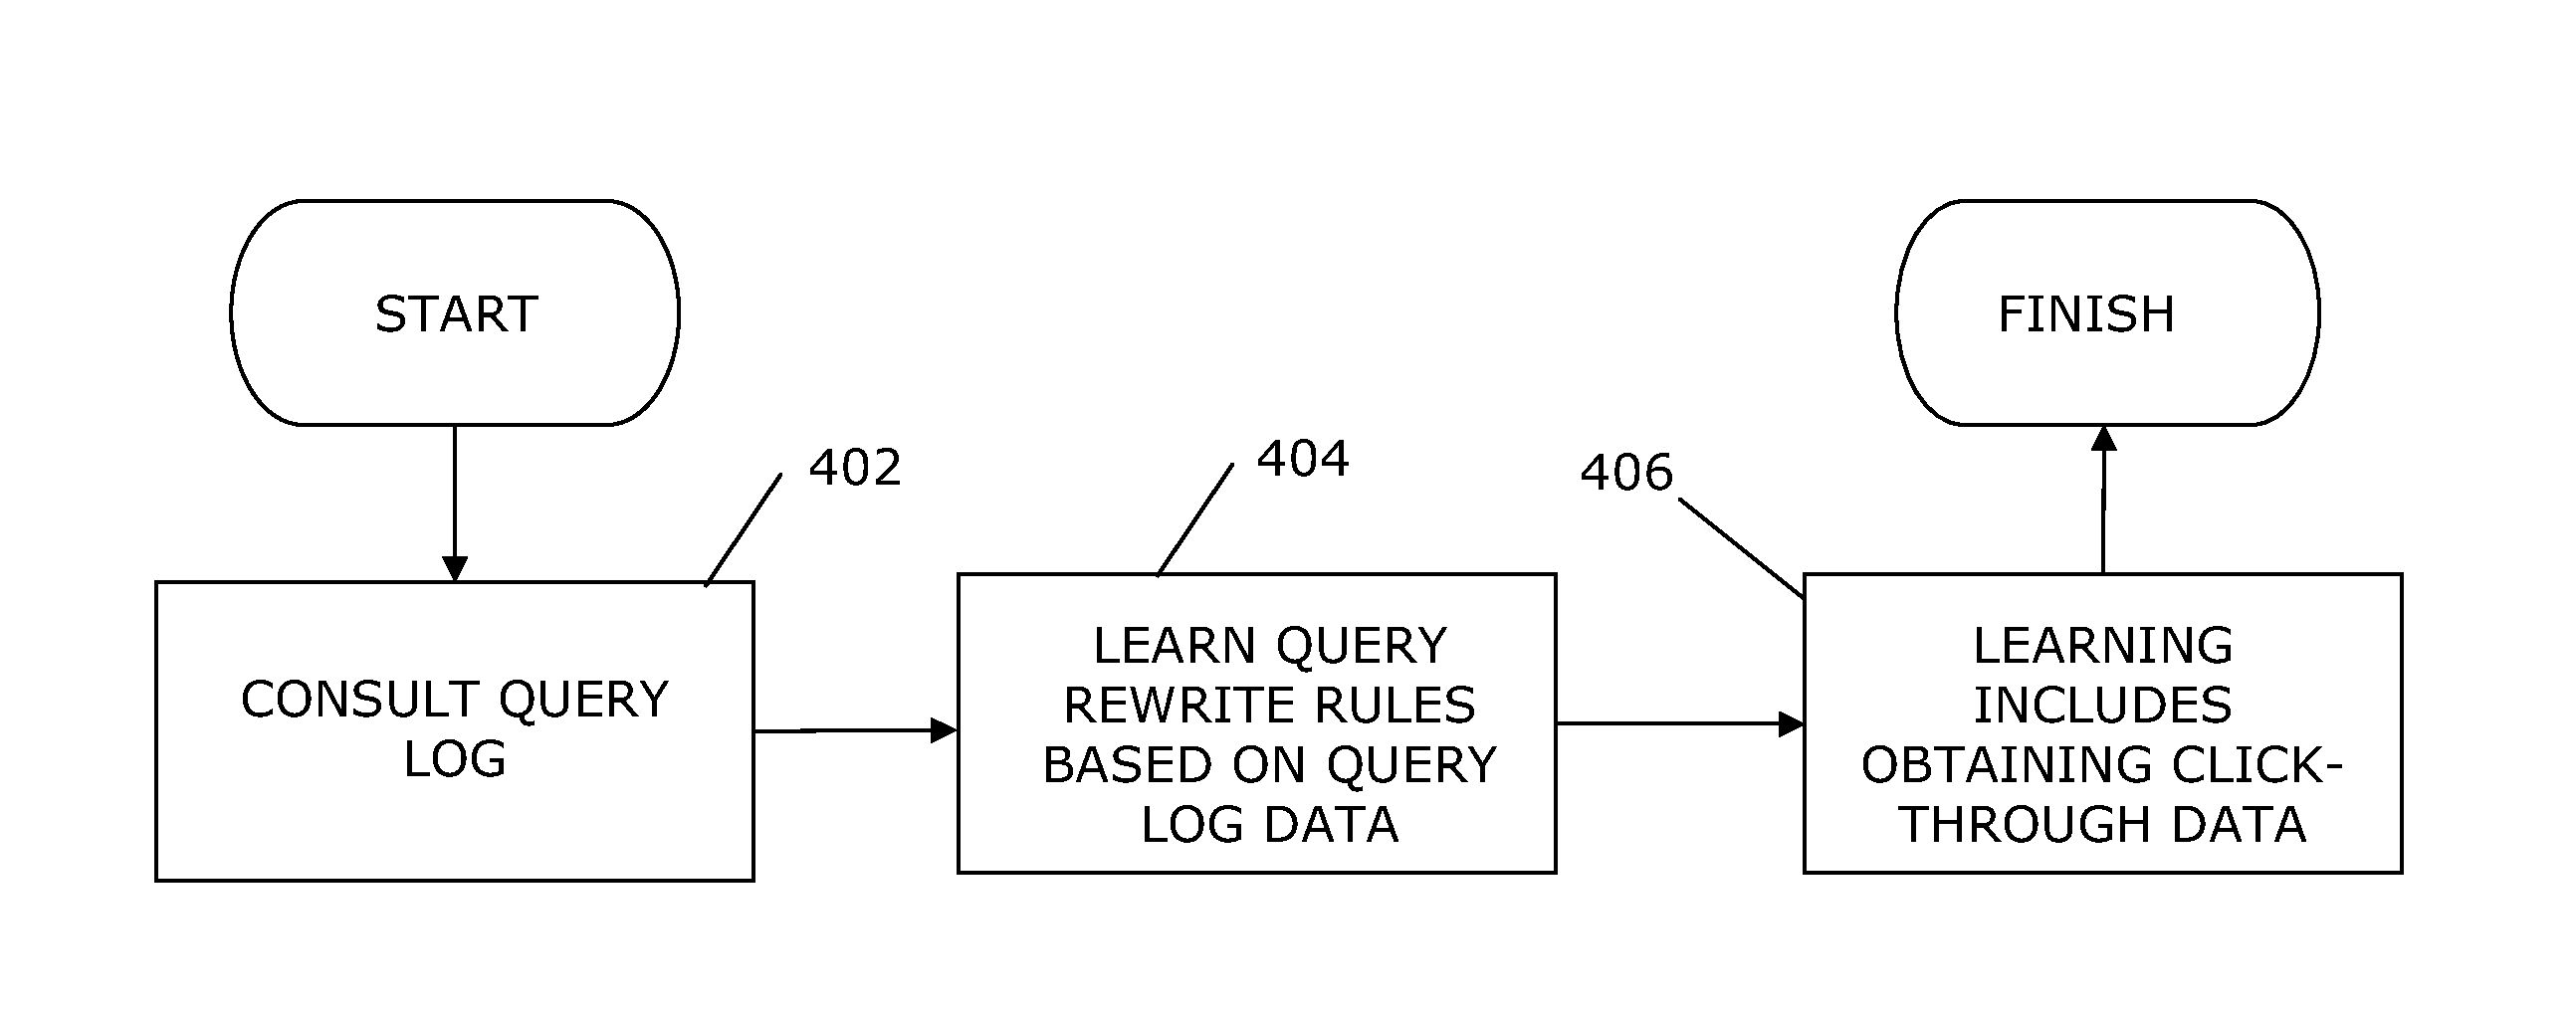 Learning rewrite rules for search database systems using query logs